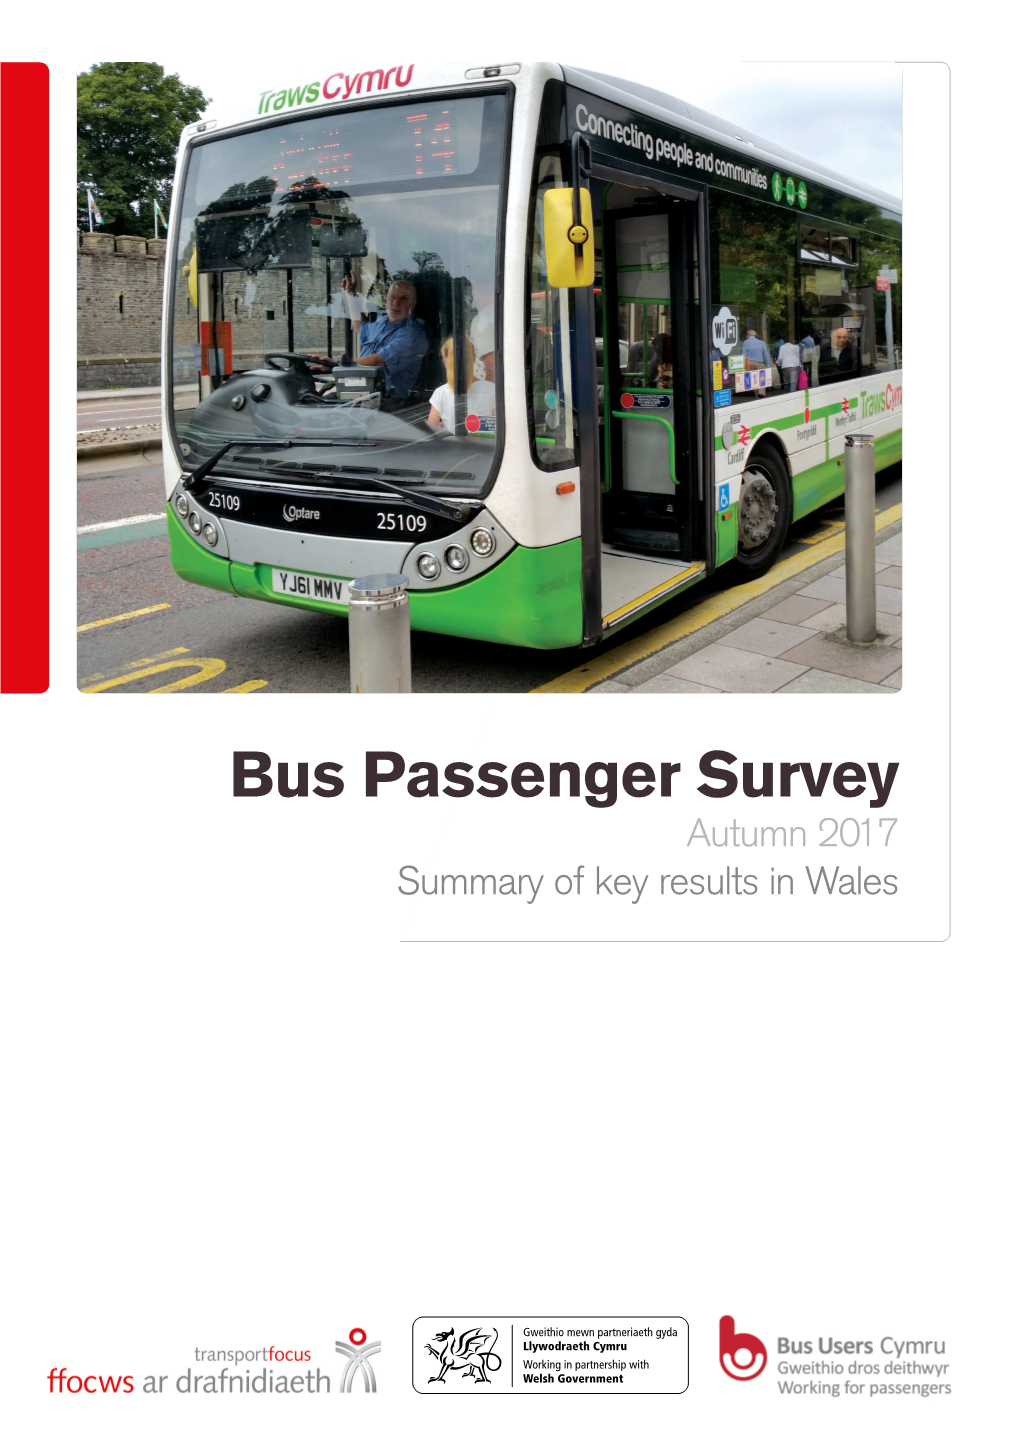 Bus Passenger Survey Autumn 2017 Summary of Key Results in Wales Wales Region Results Key Findings